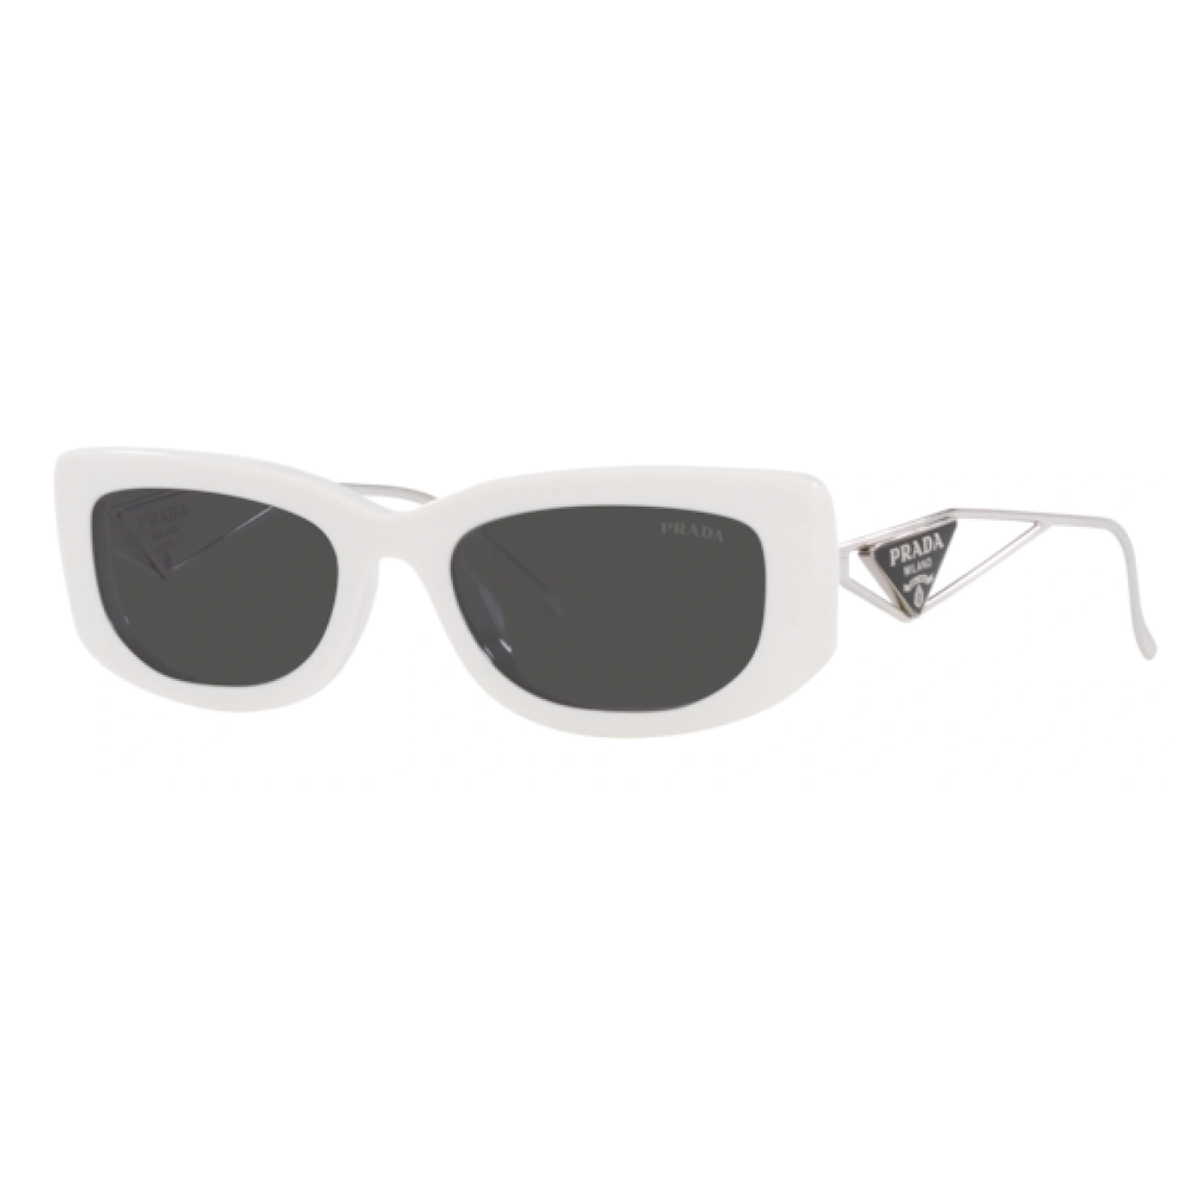 "Elevate your look with Prada SPR 14Y 142-5S0 rectangular sunglasses, featuring a talc frame and dark grey lenses. Experience the luxury of Prada's premium eyewear for women."